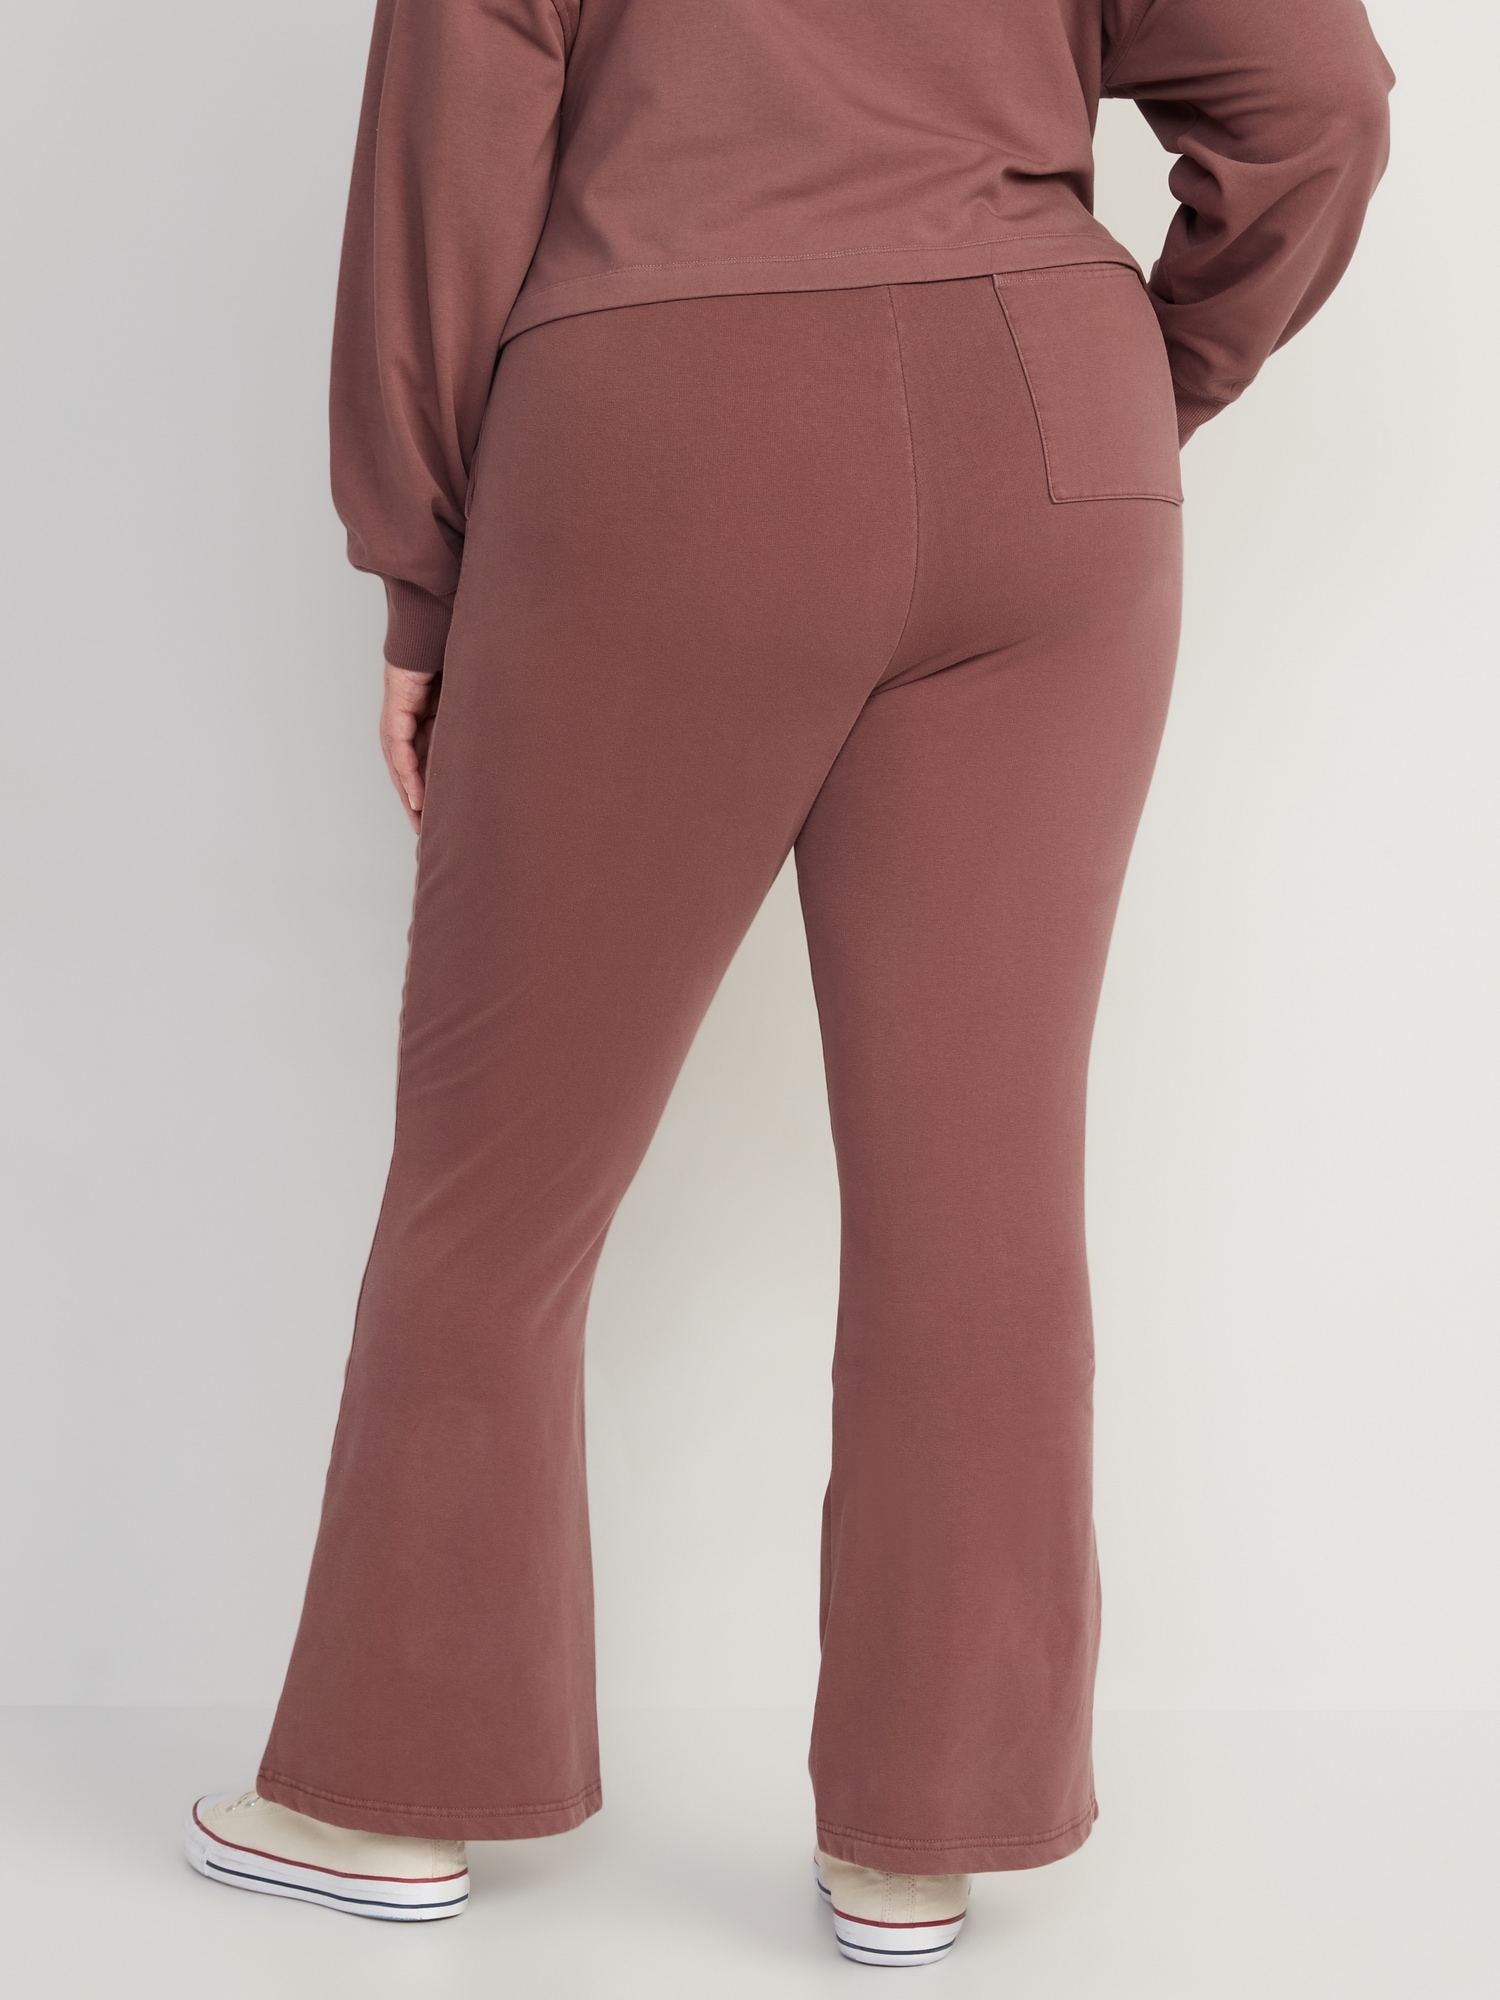 Winter Womens Skinny Drawstring Flare Pants With High Waist Thick, Warm,  And Fashionable Joggers And Cargo Sweatpants Women From Luote, $20.8